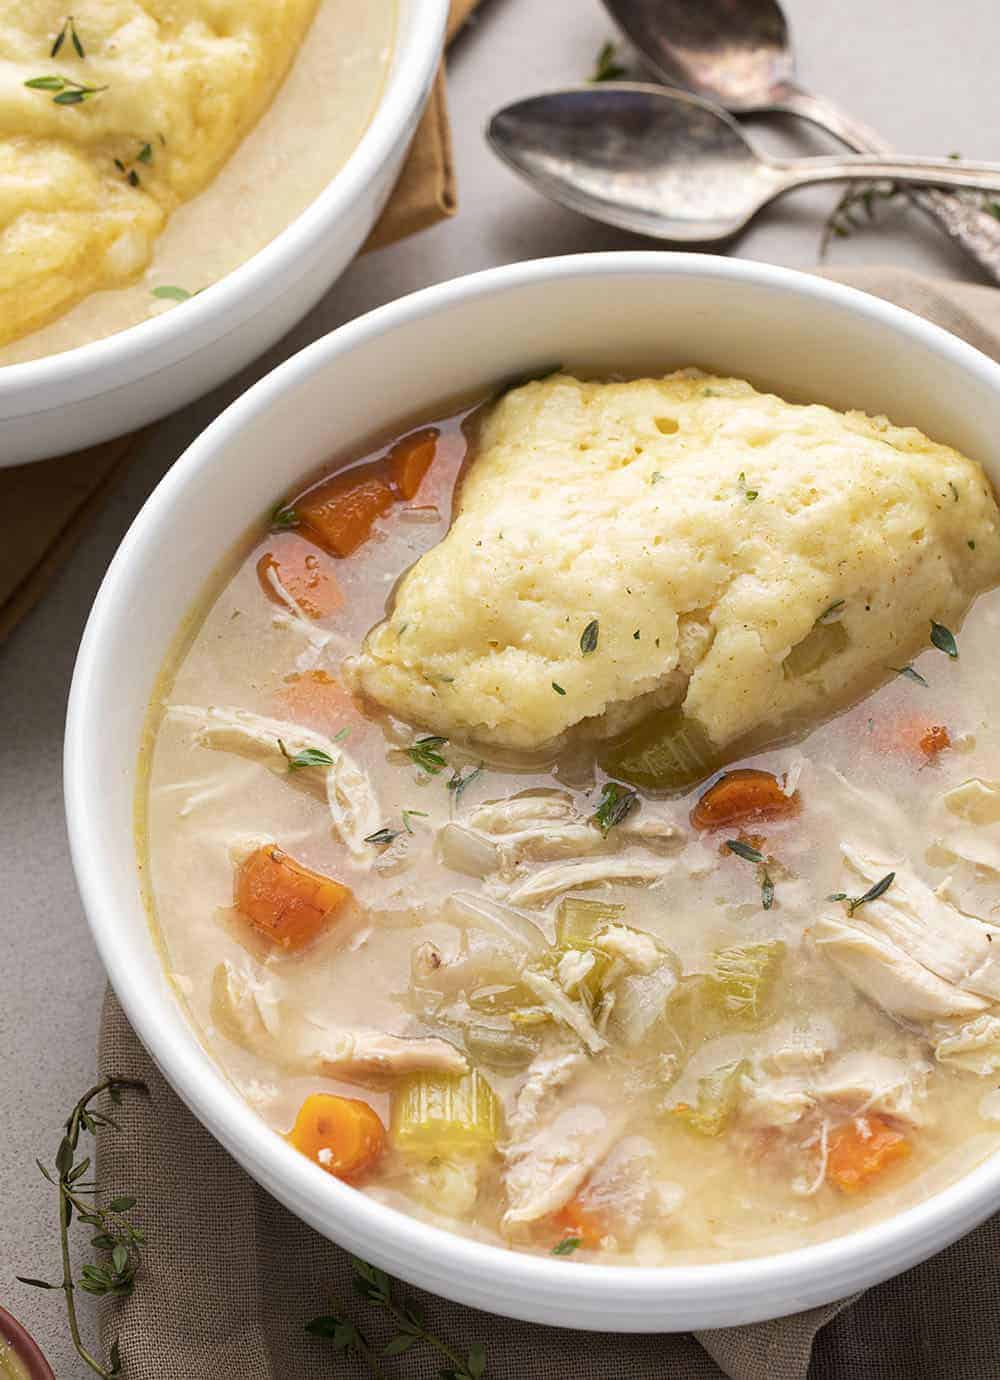 Old Fashioned Chicken and Dumplings in Two White Bowls